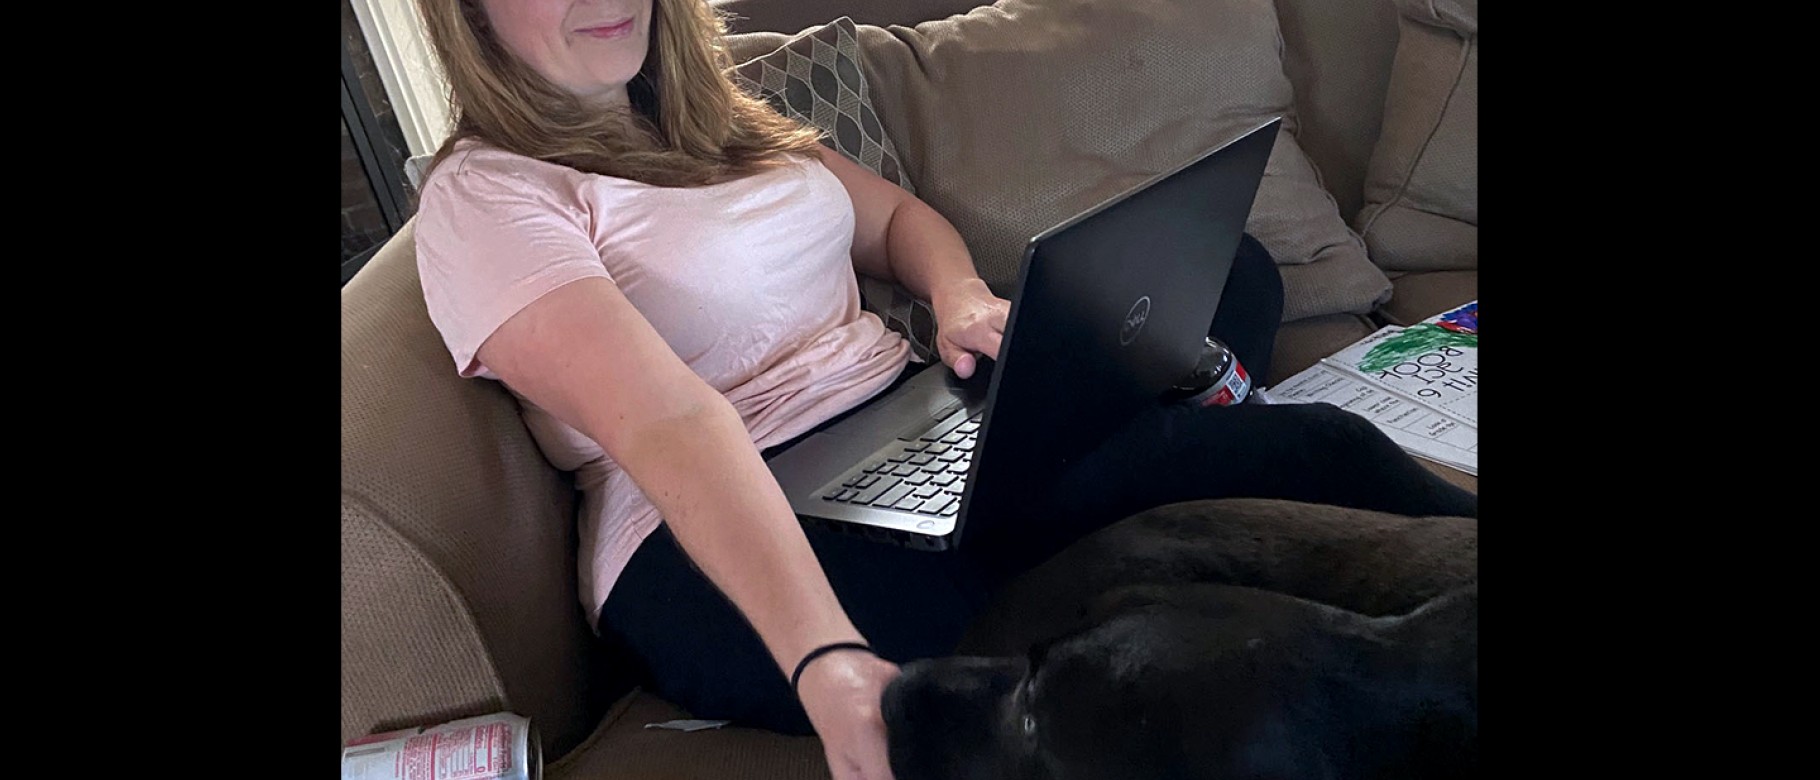 Meghan May, Ph.D., UNE professor of microbiology, hunkers down at home to work. With a little help from dog Rosie, she provides 